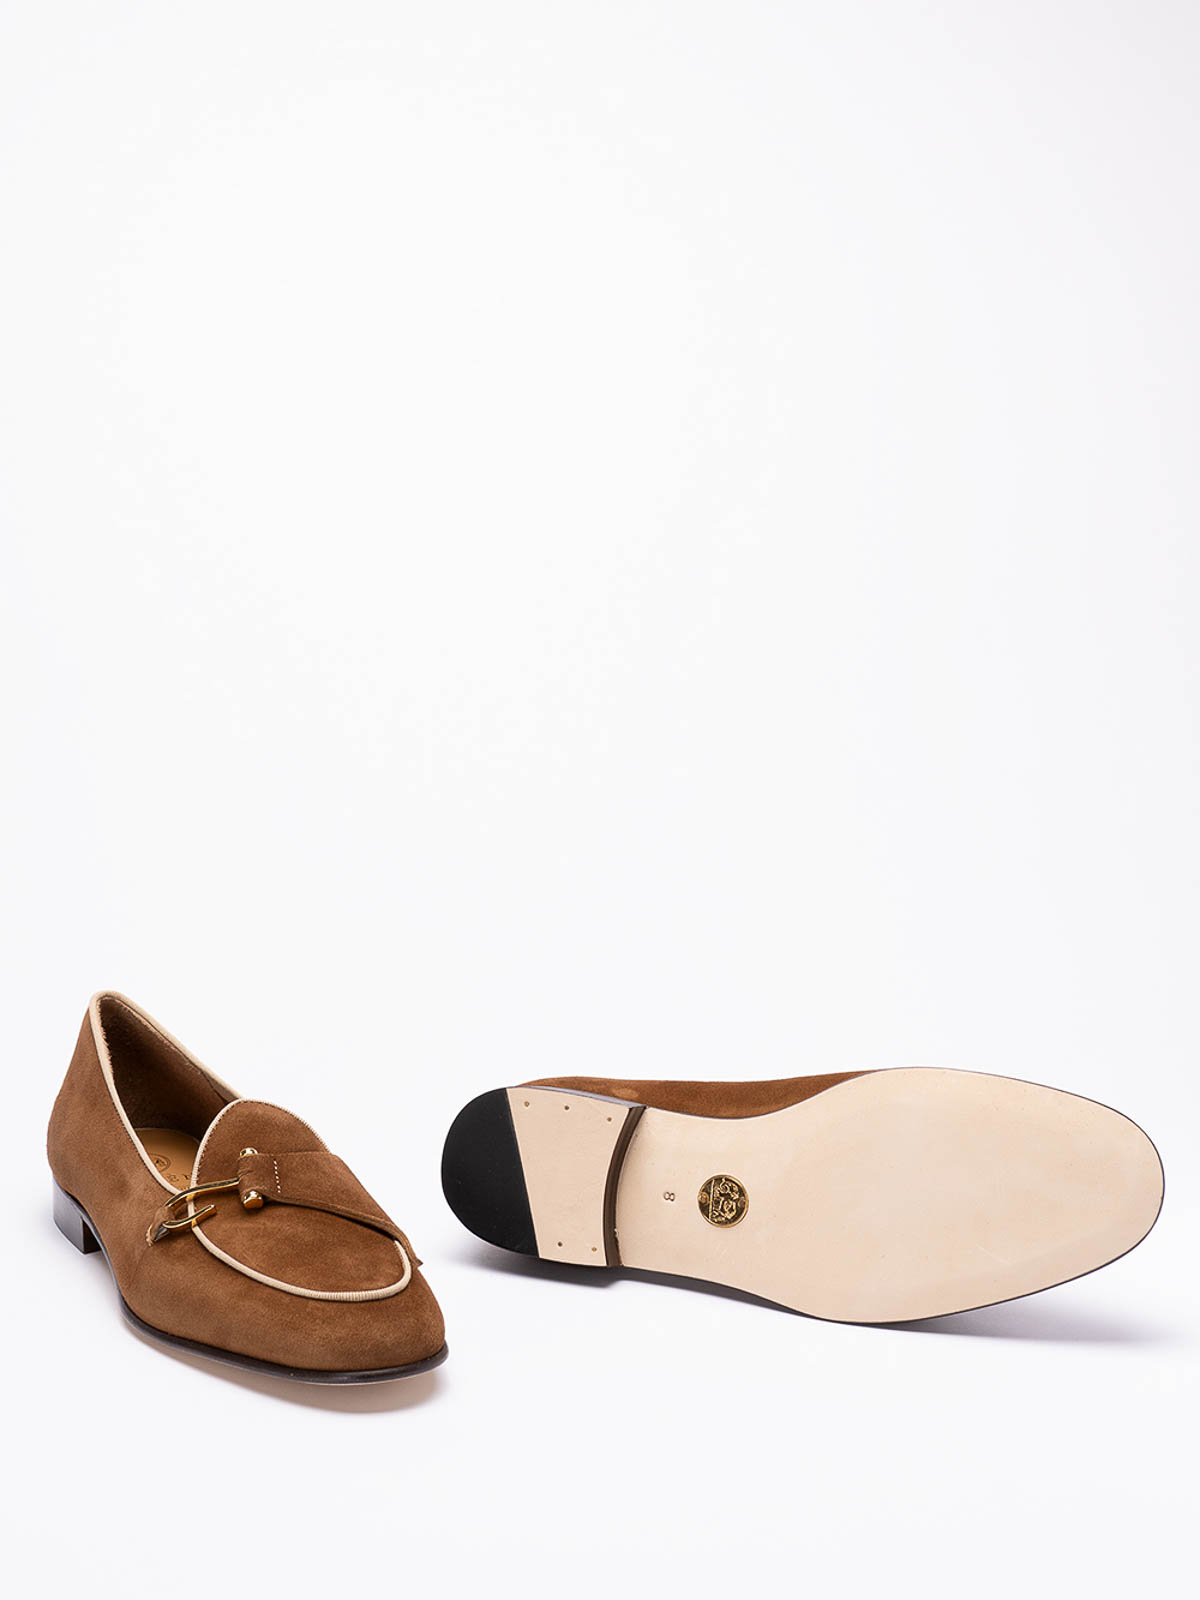 Shop Edhen Milano Comporta Loafers In Brown